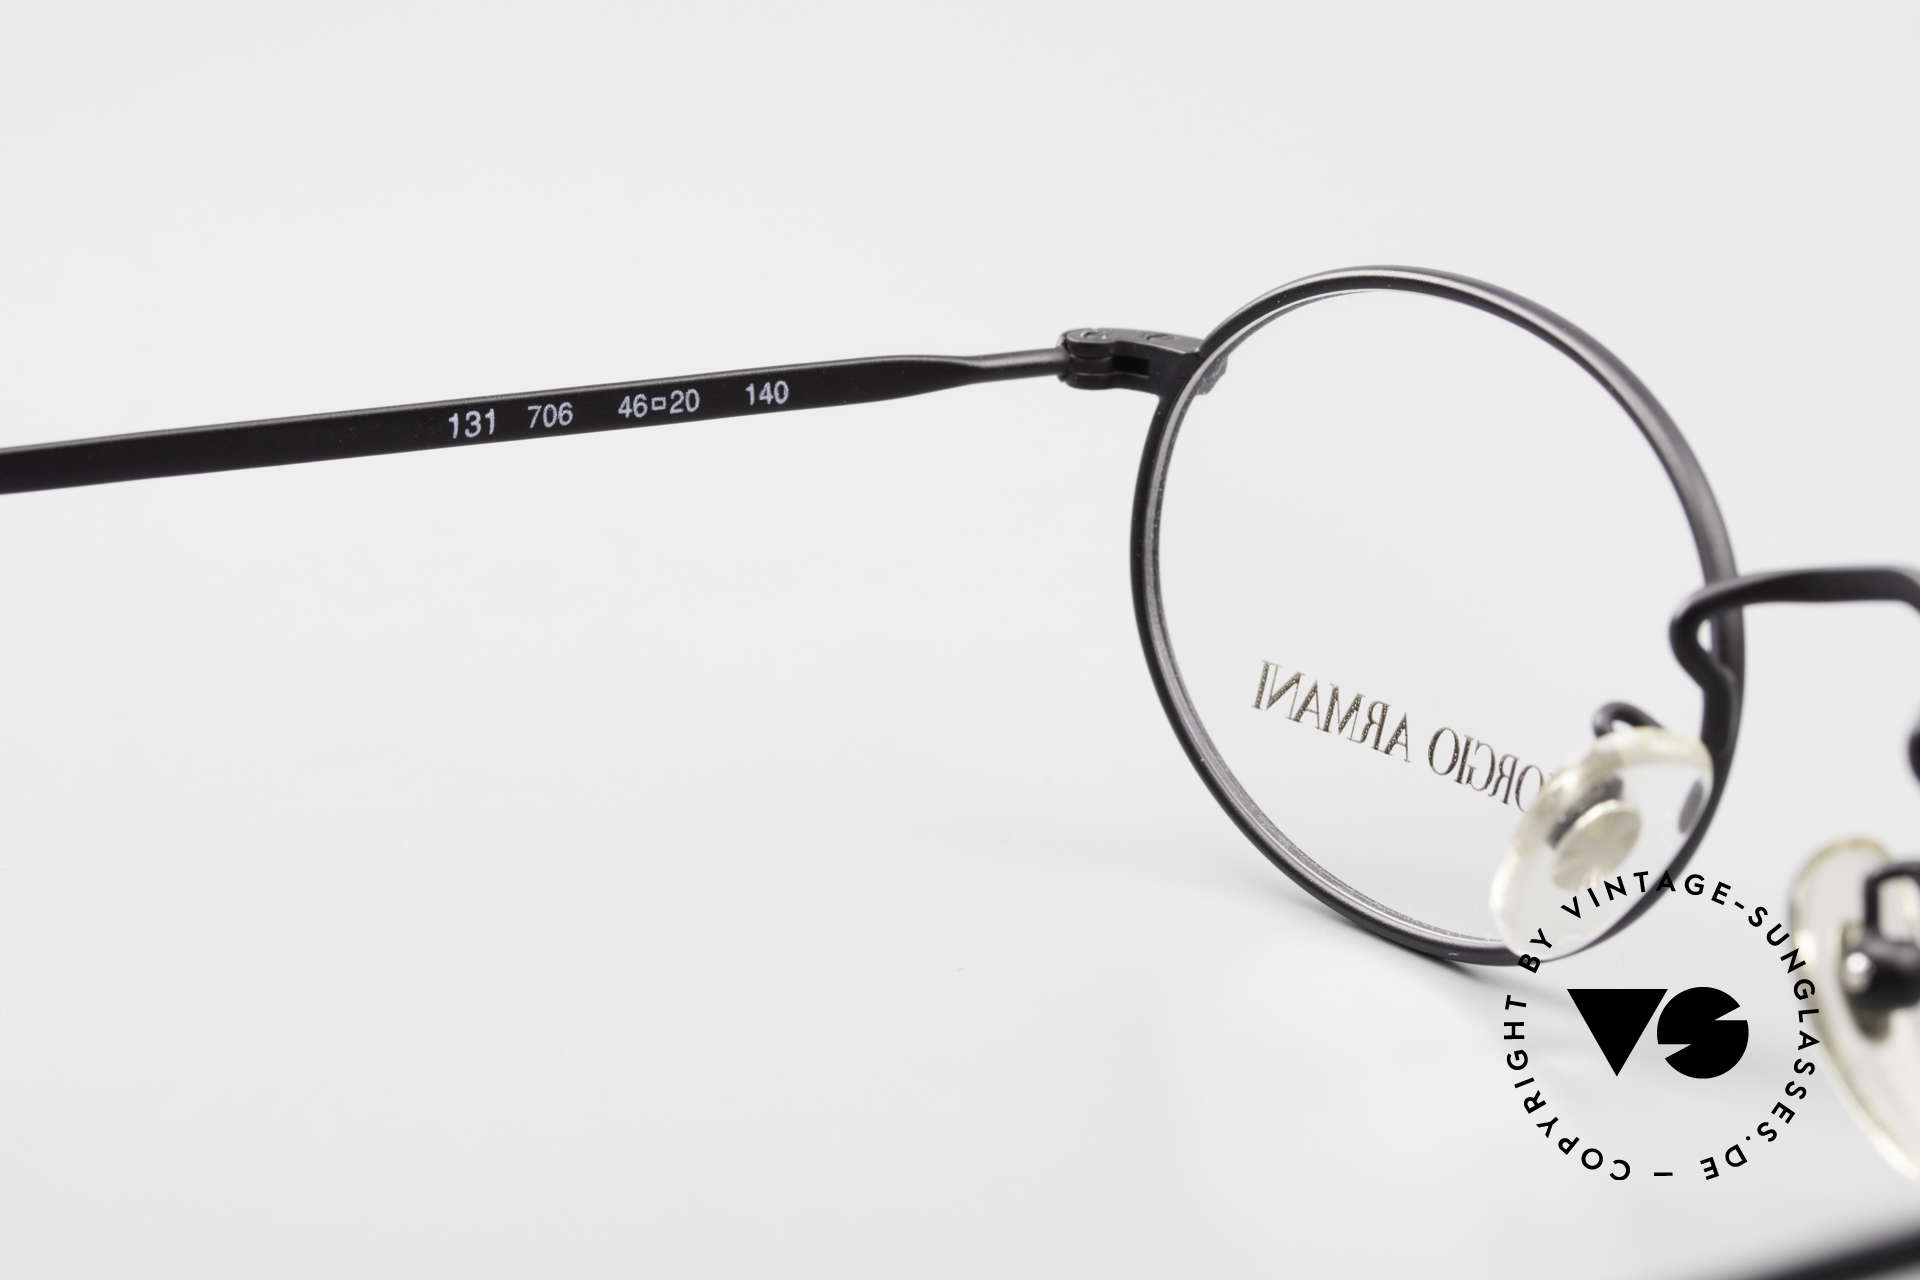 Giorgio Armani 131 Vintage Eyeglasses Oval Frame, the frame is made for prescription lenses, of course, Made for Men and Women